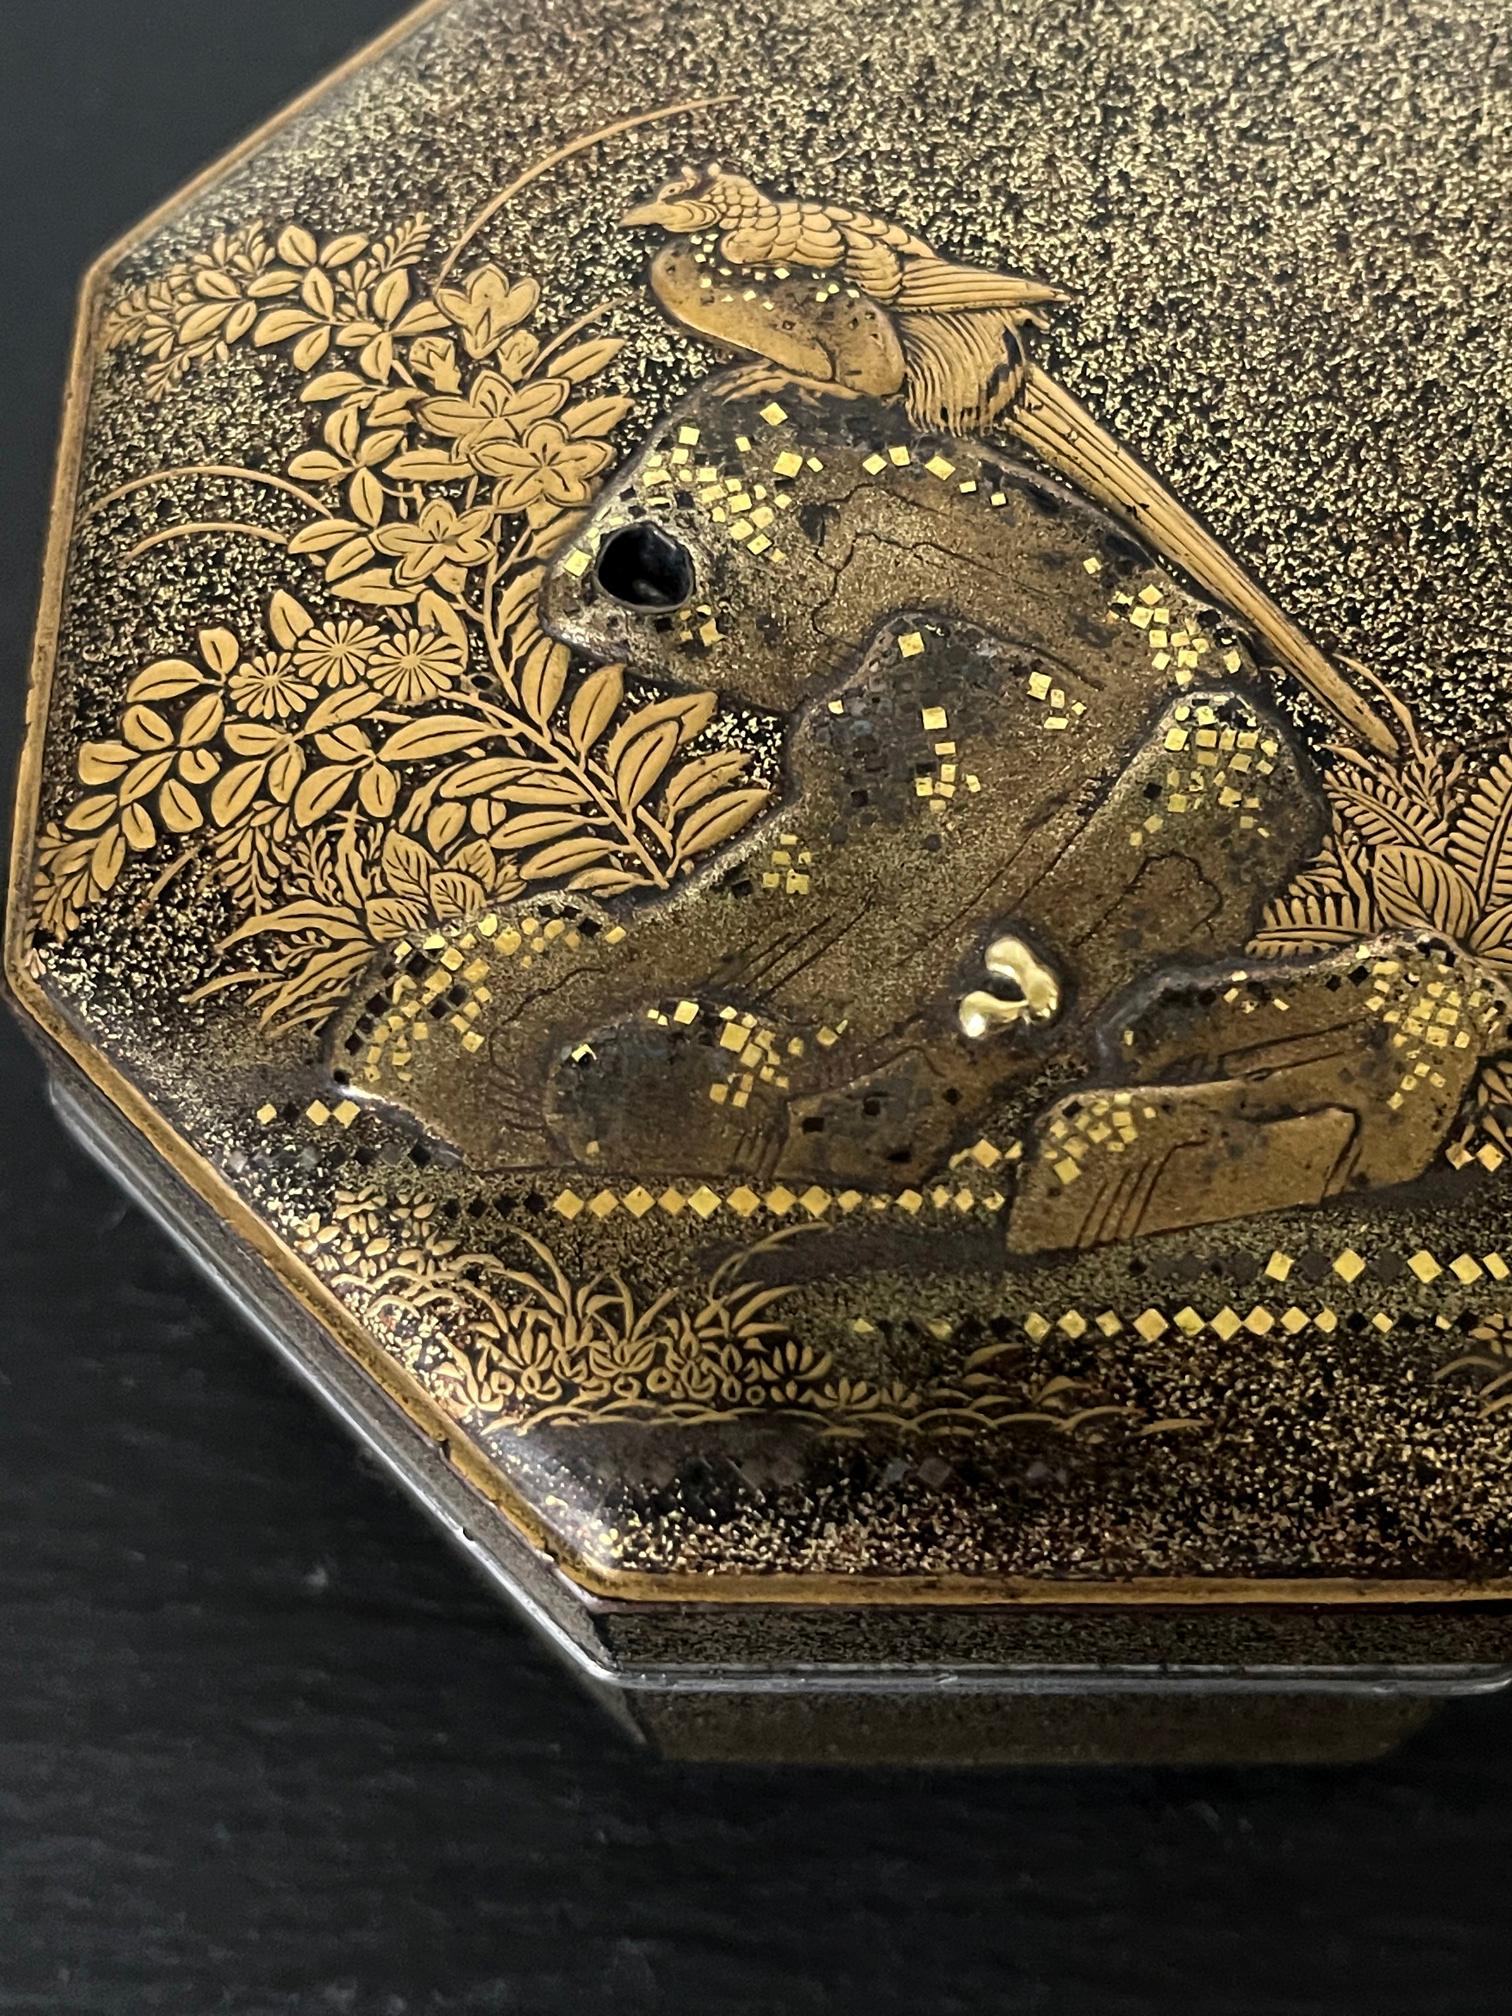 Exquisite Early Japanese Lacquer Kobako Box with Insert Tray 7